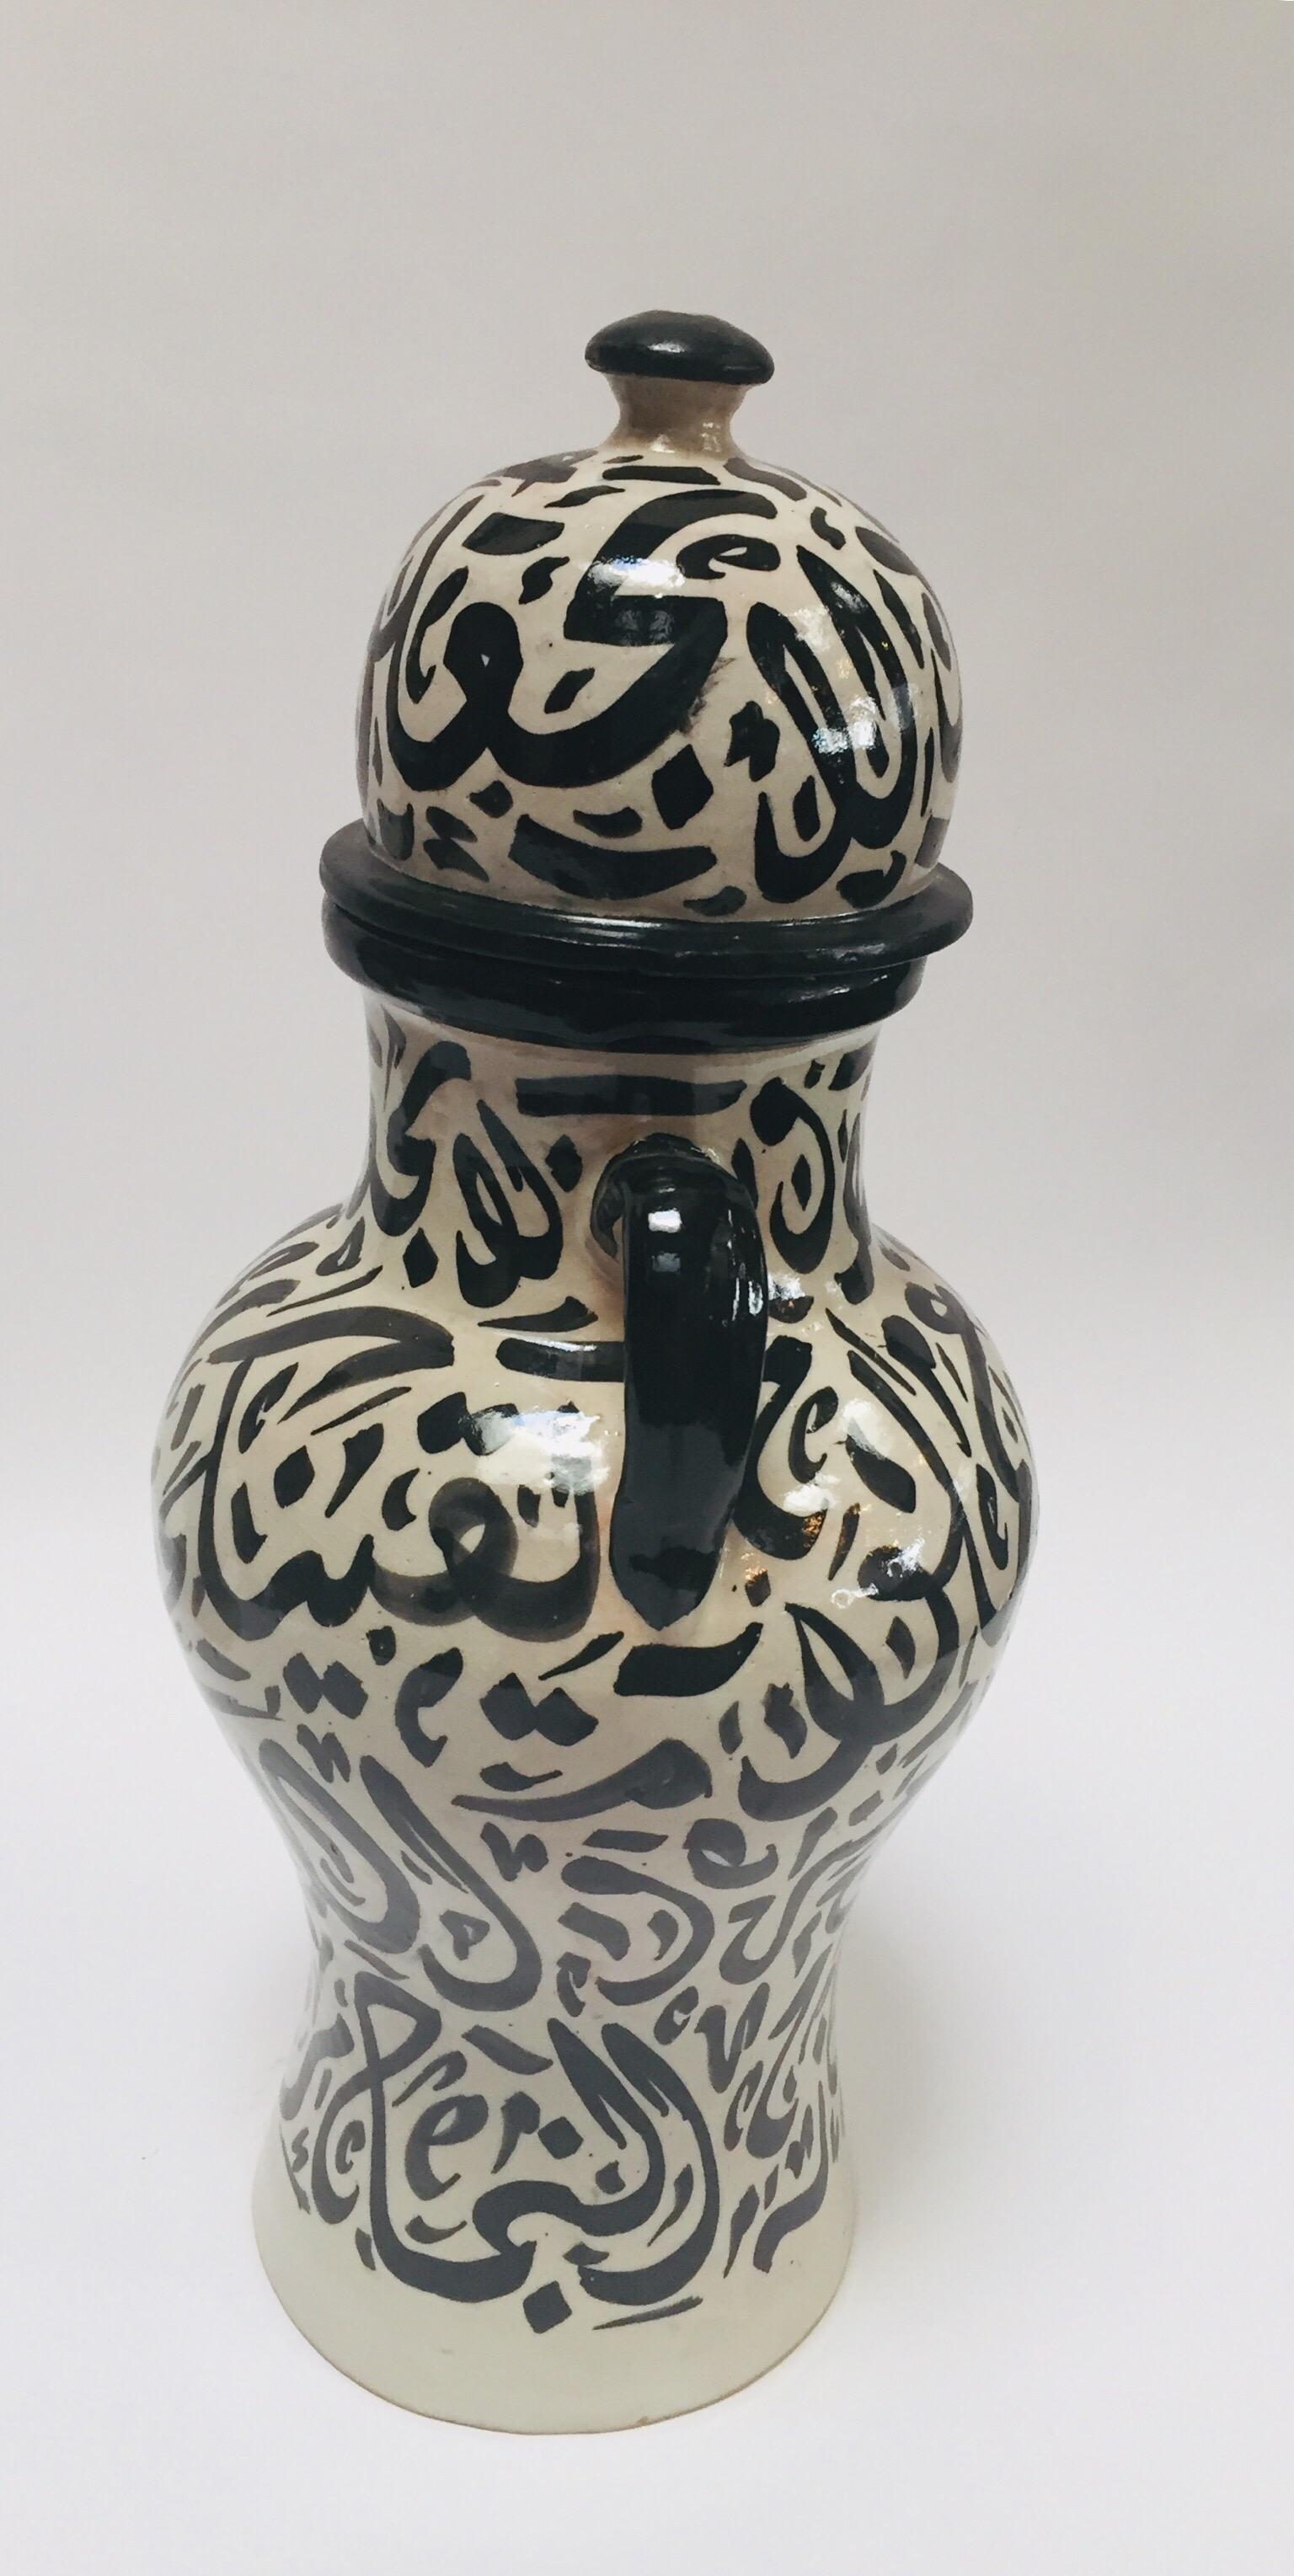 Hand-Crafted Pair of Moorish Glazed Ceramic Jars with Arabic Calligraphy from Fez